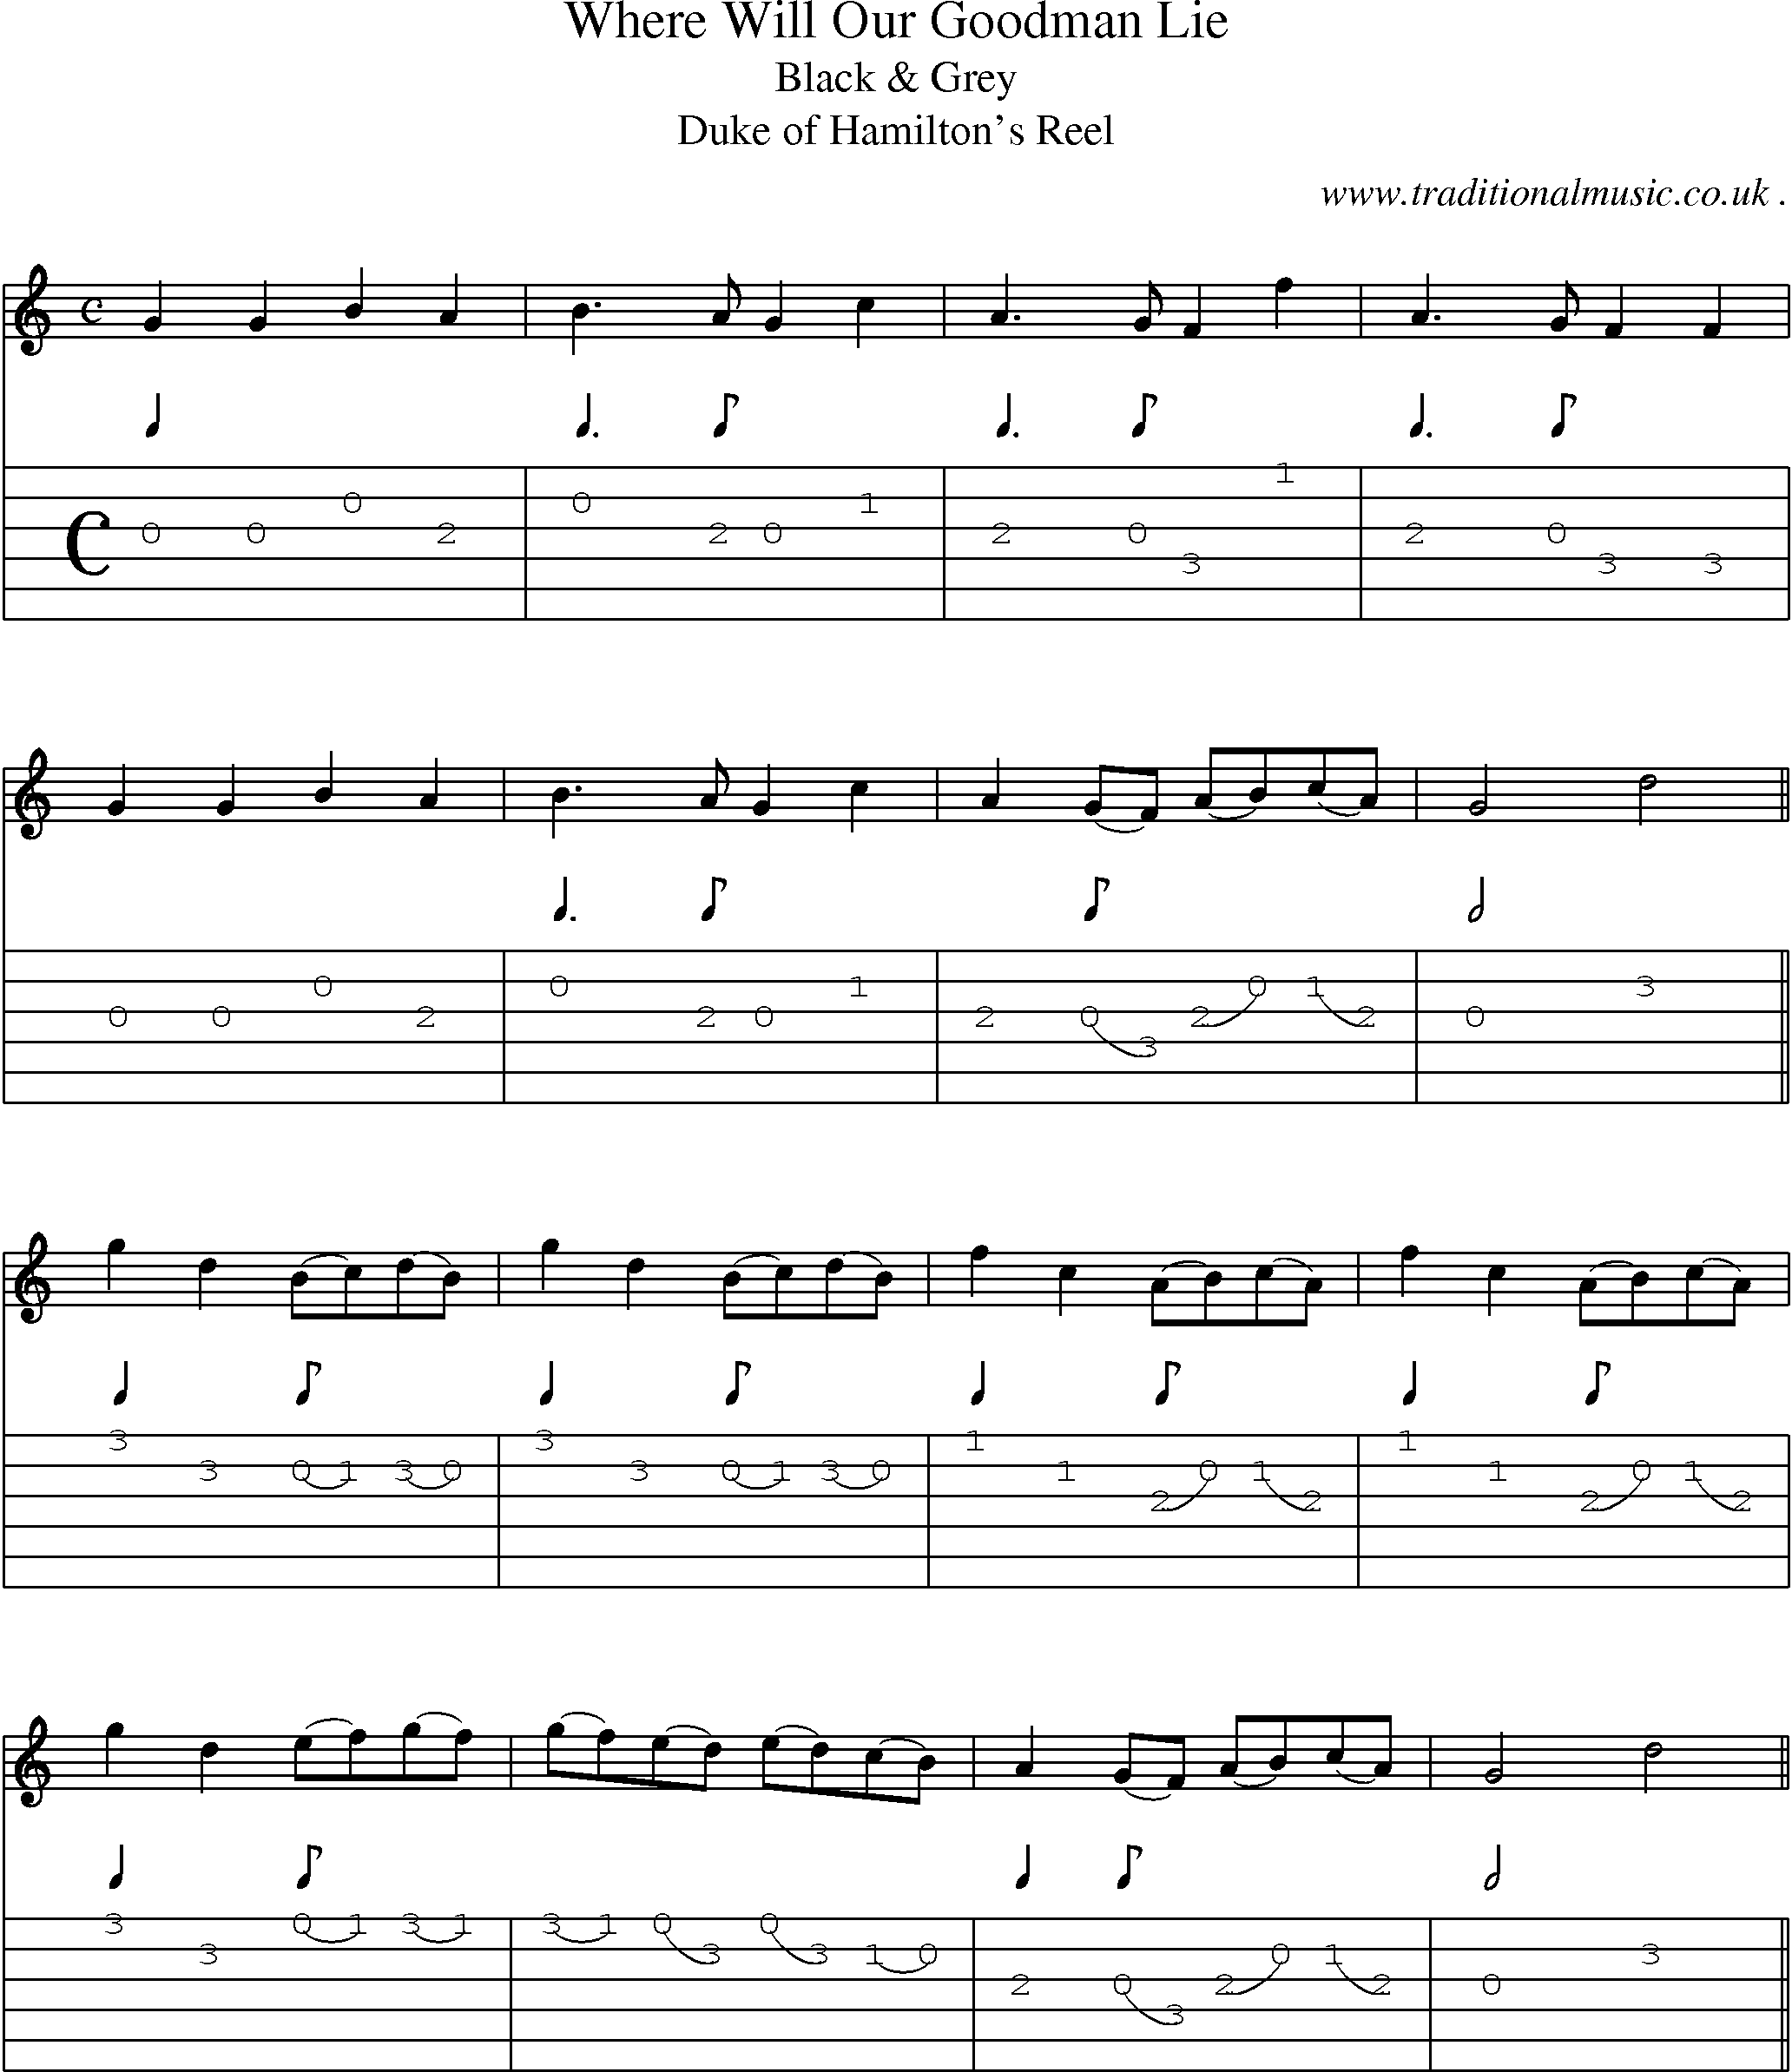 Sheet-Music and Guitar Tabs for Where Will Our Goodman Lie